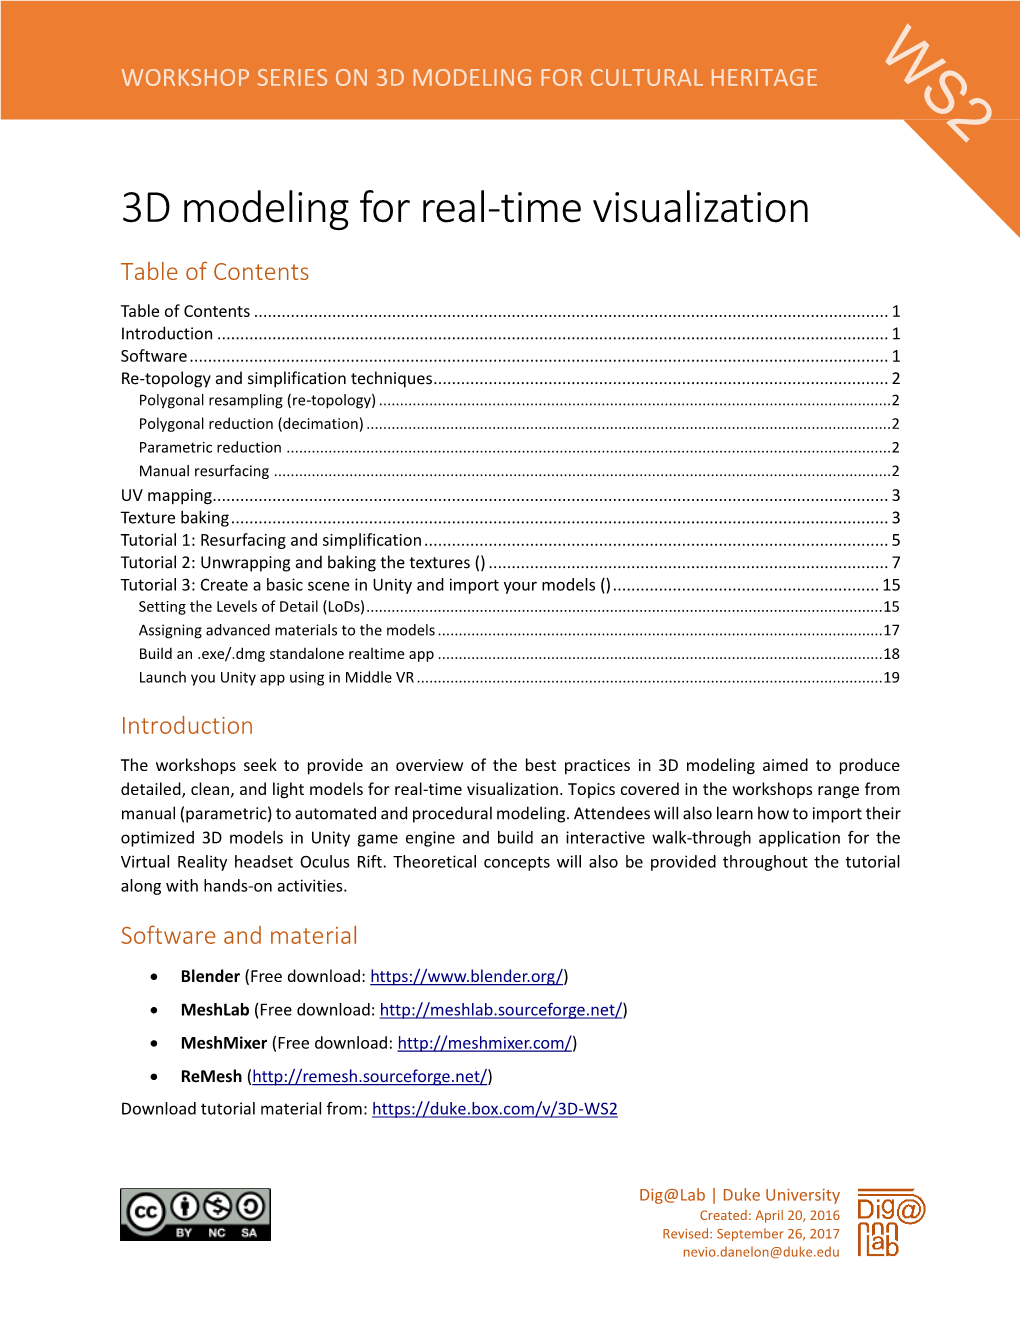 3D Modeling for Real-Time Visualization